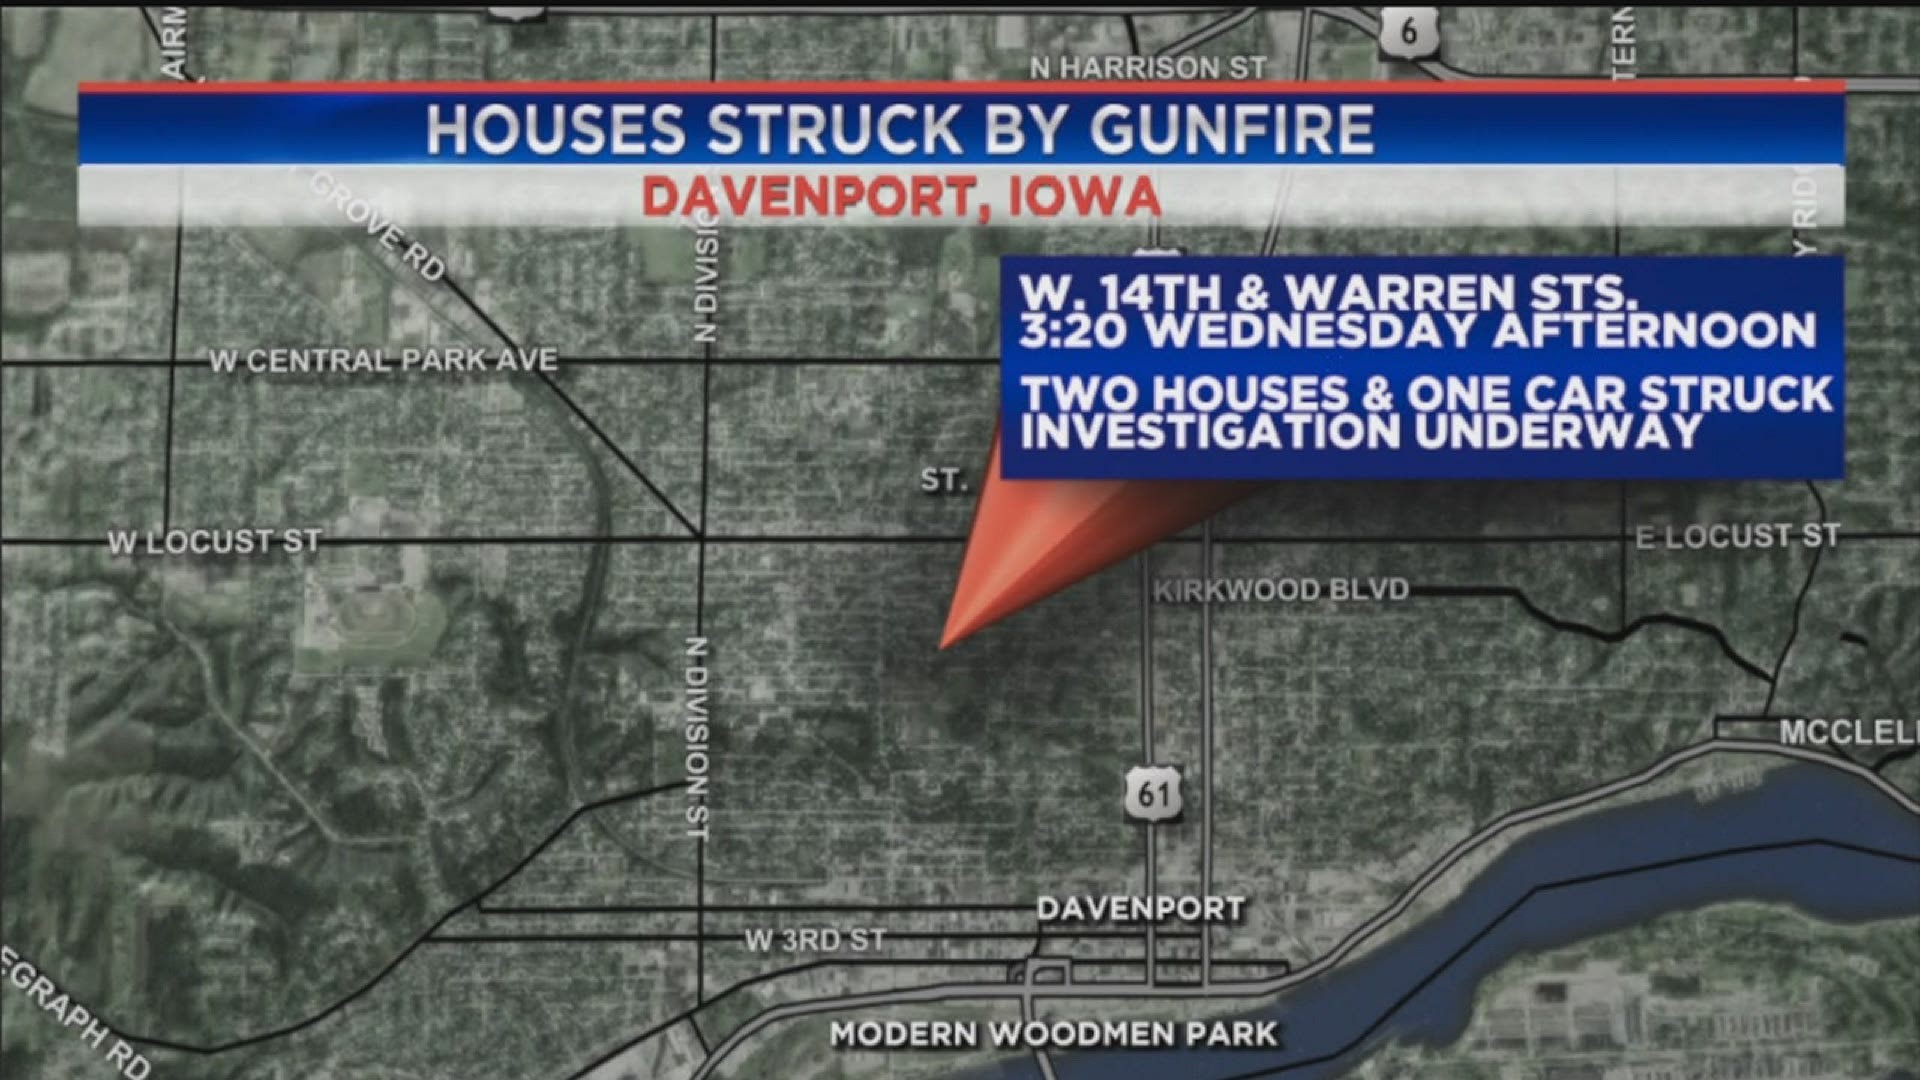 Davenport police say two houses and one car were hit.